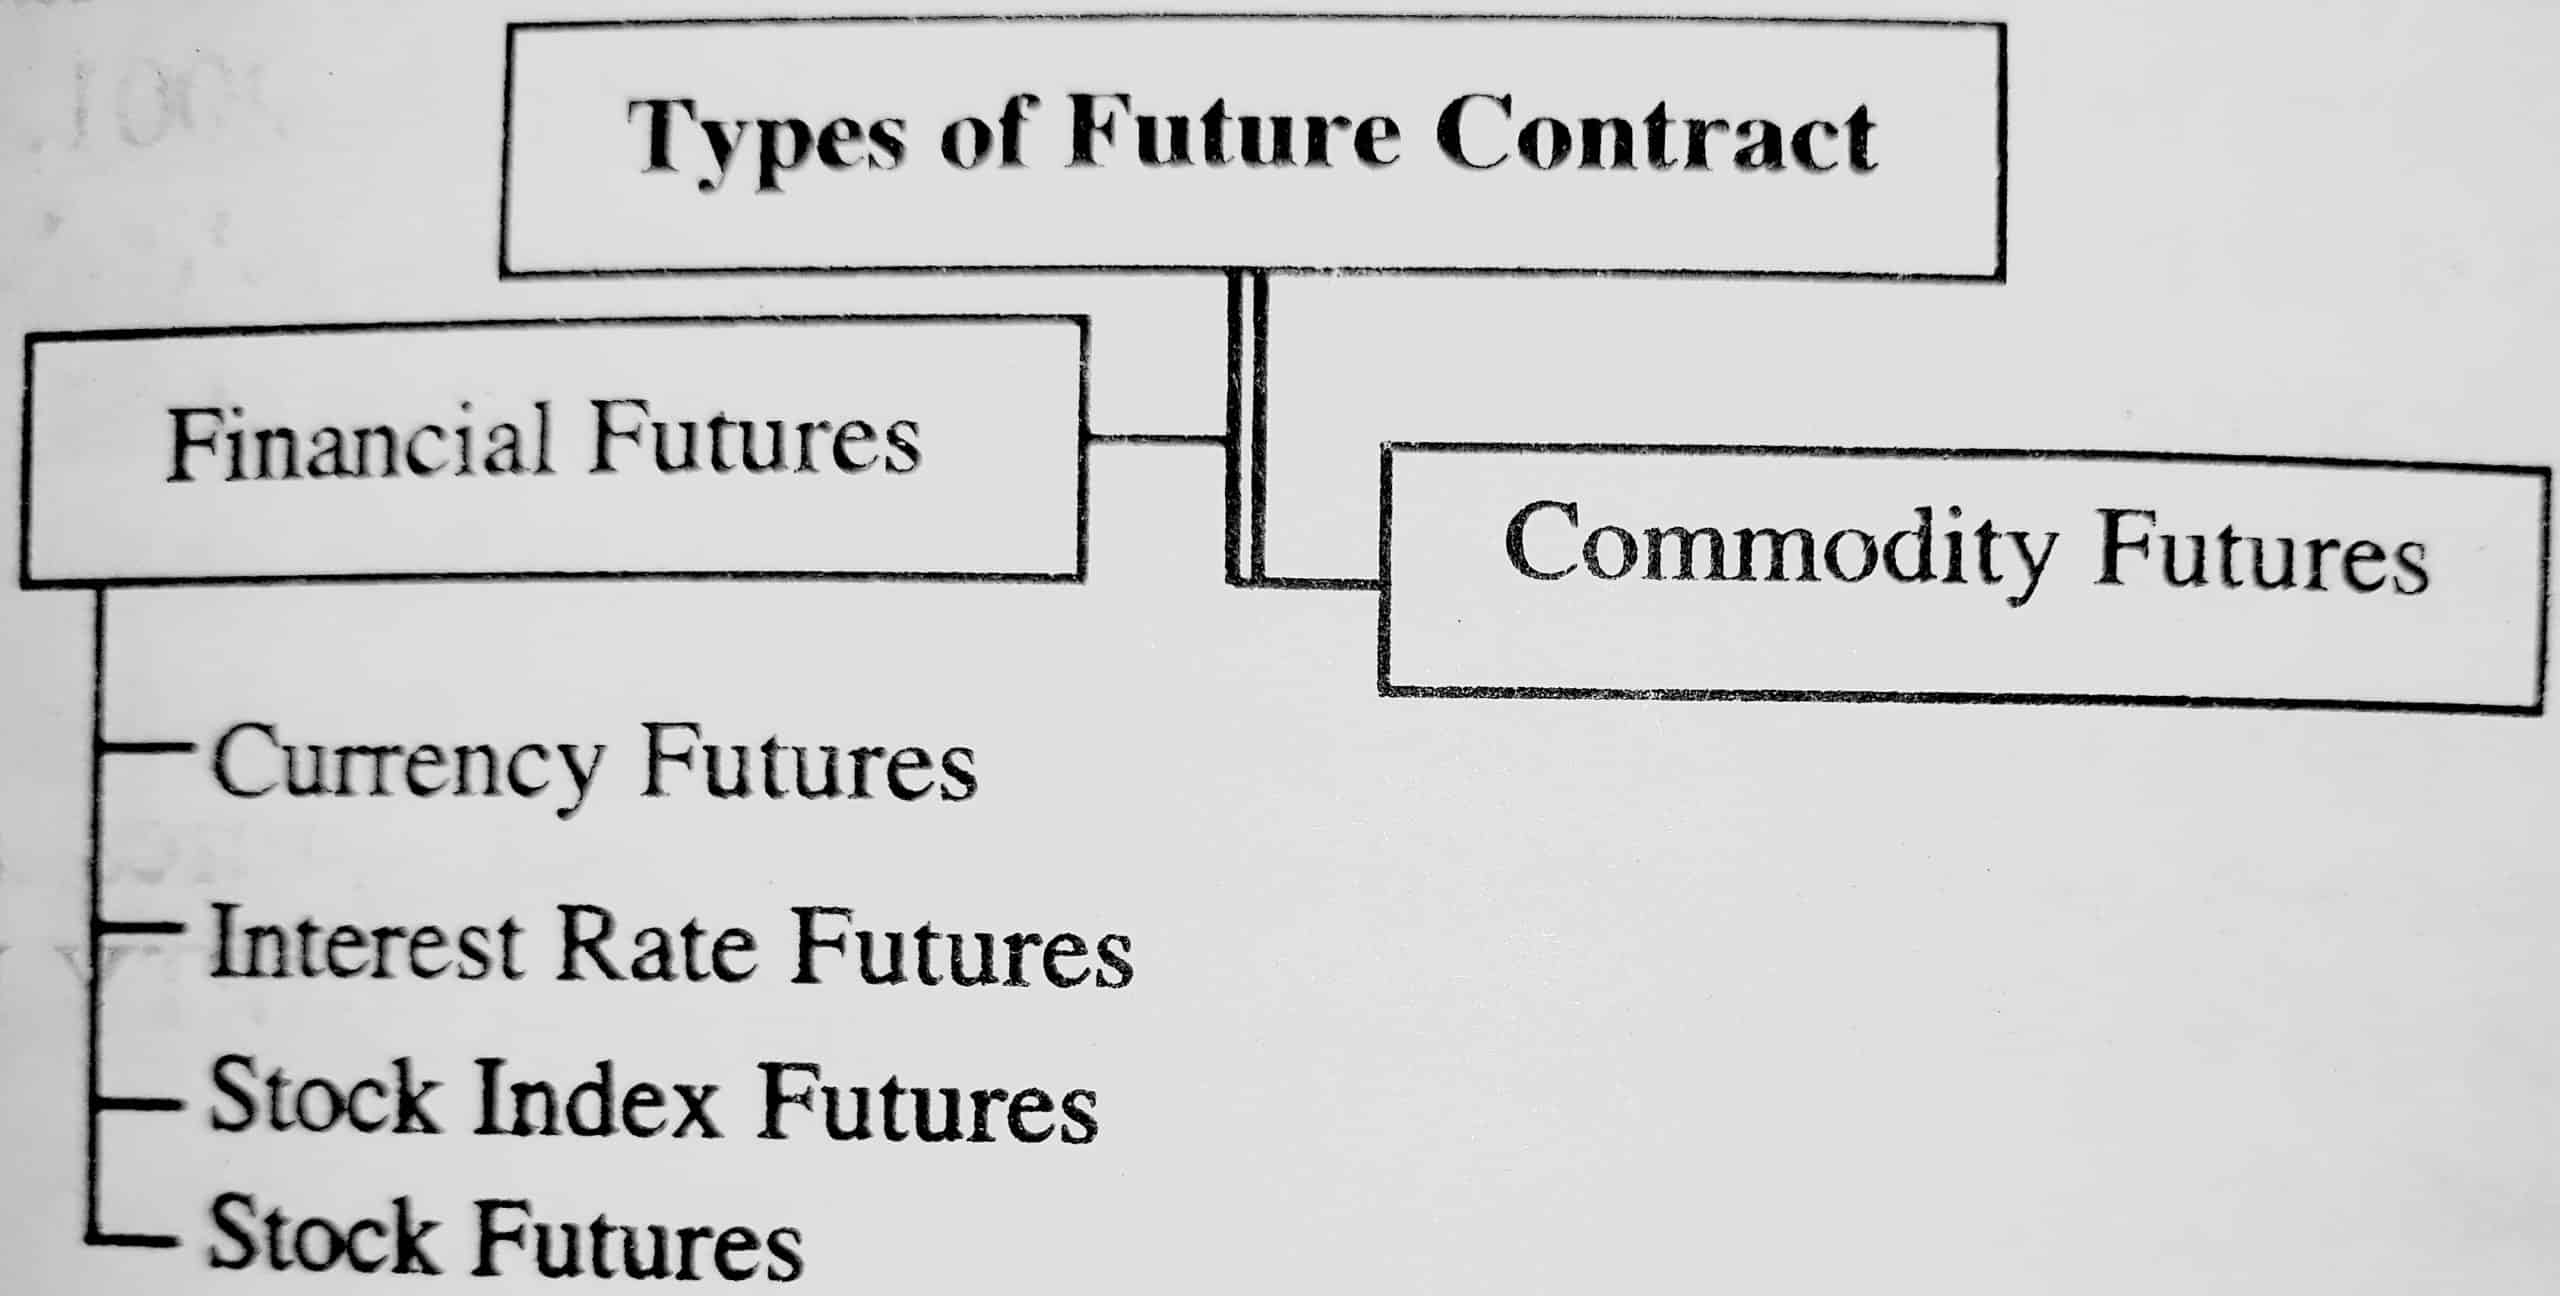 Types of Future Contracts